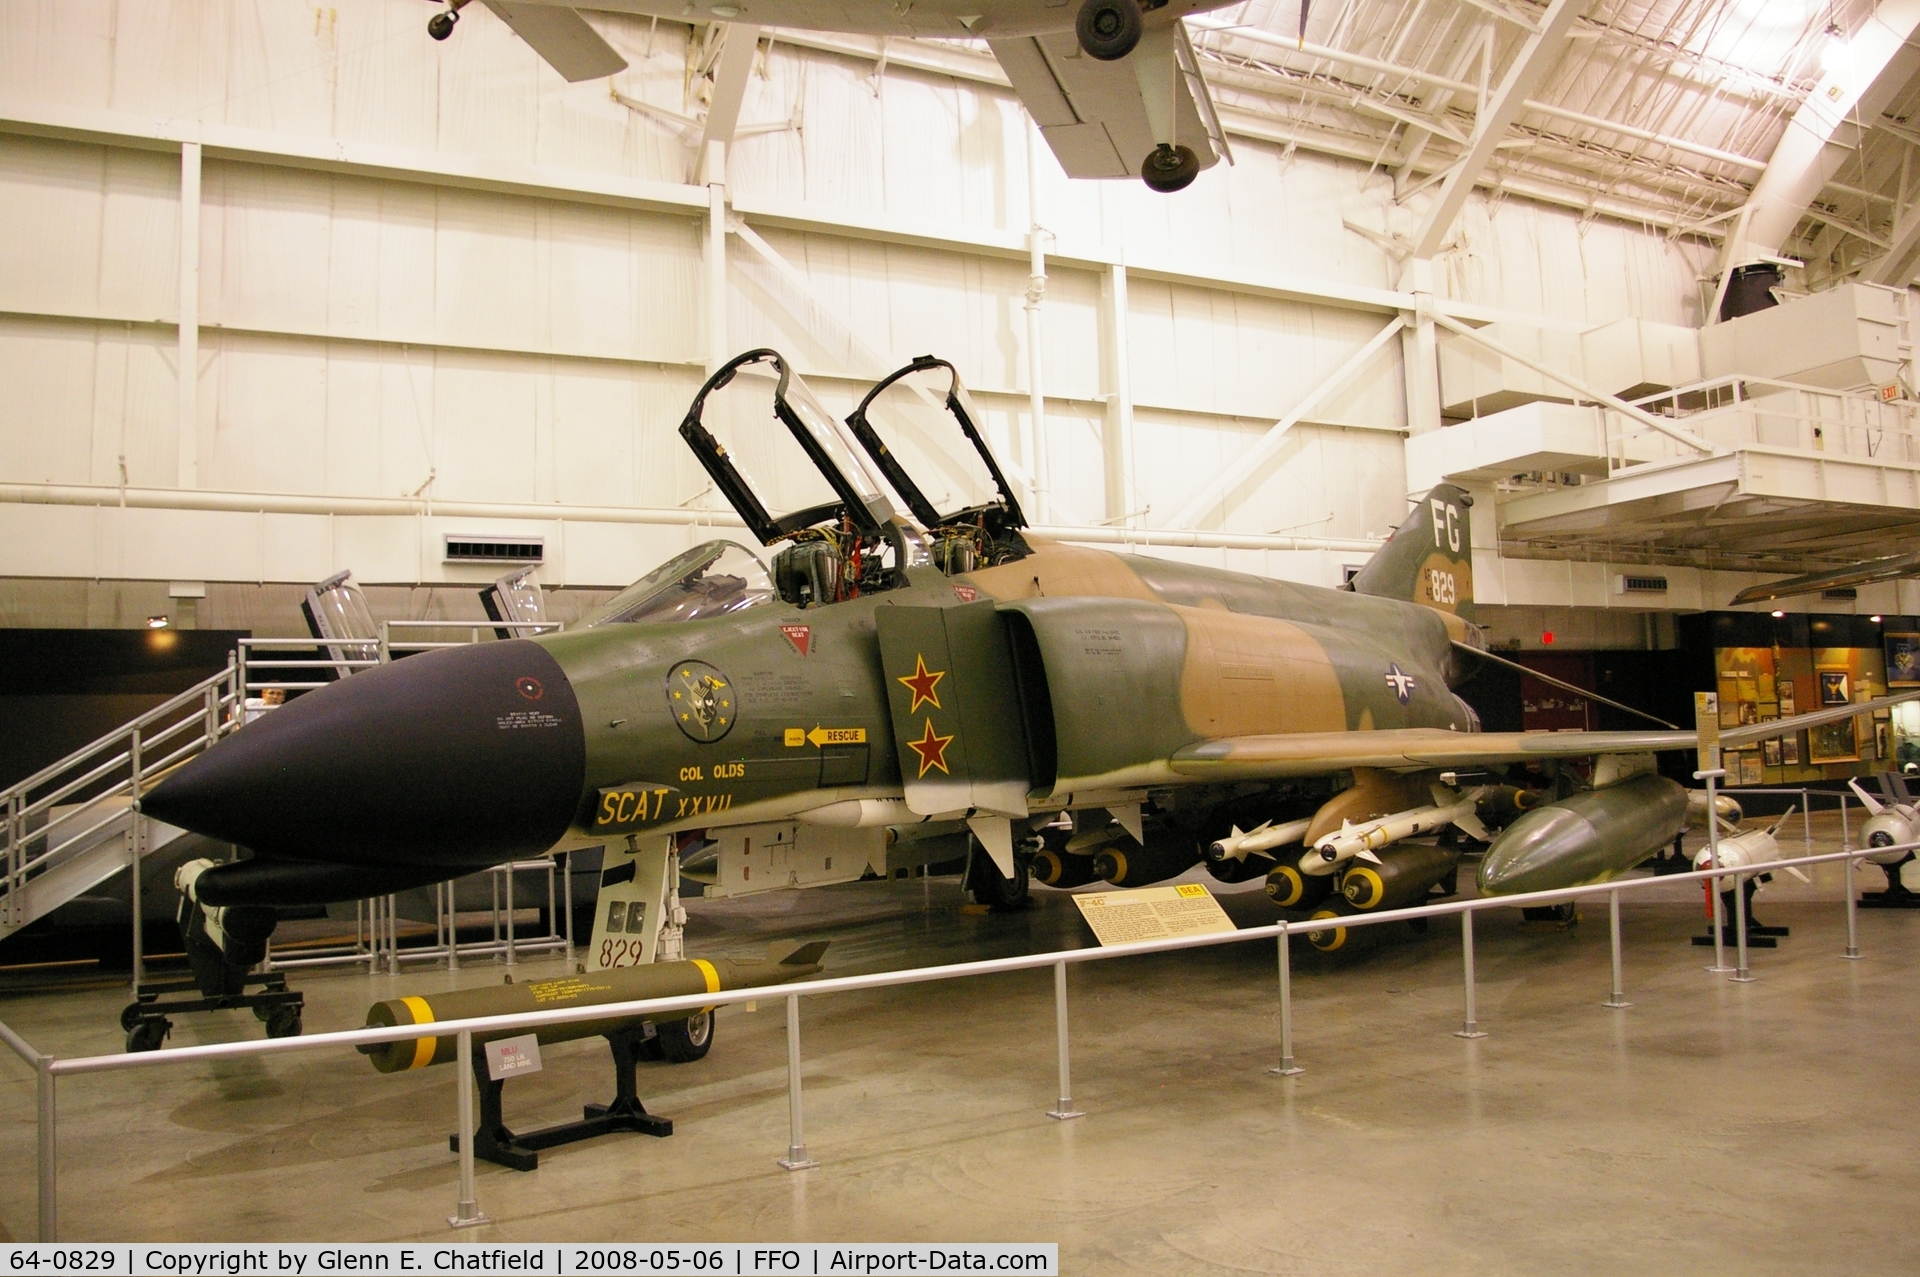 64-0829, 1964 McDonnell F-4C Phantom II C/N 1169, Displayed at the National Museum of the U.S. Air Force